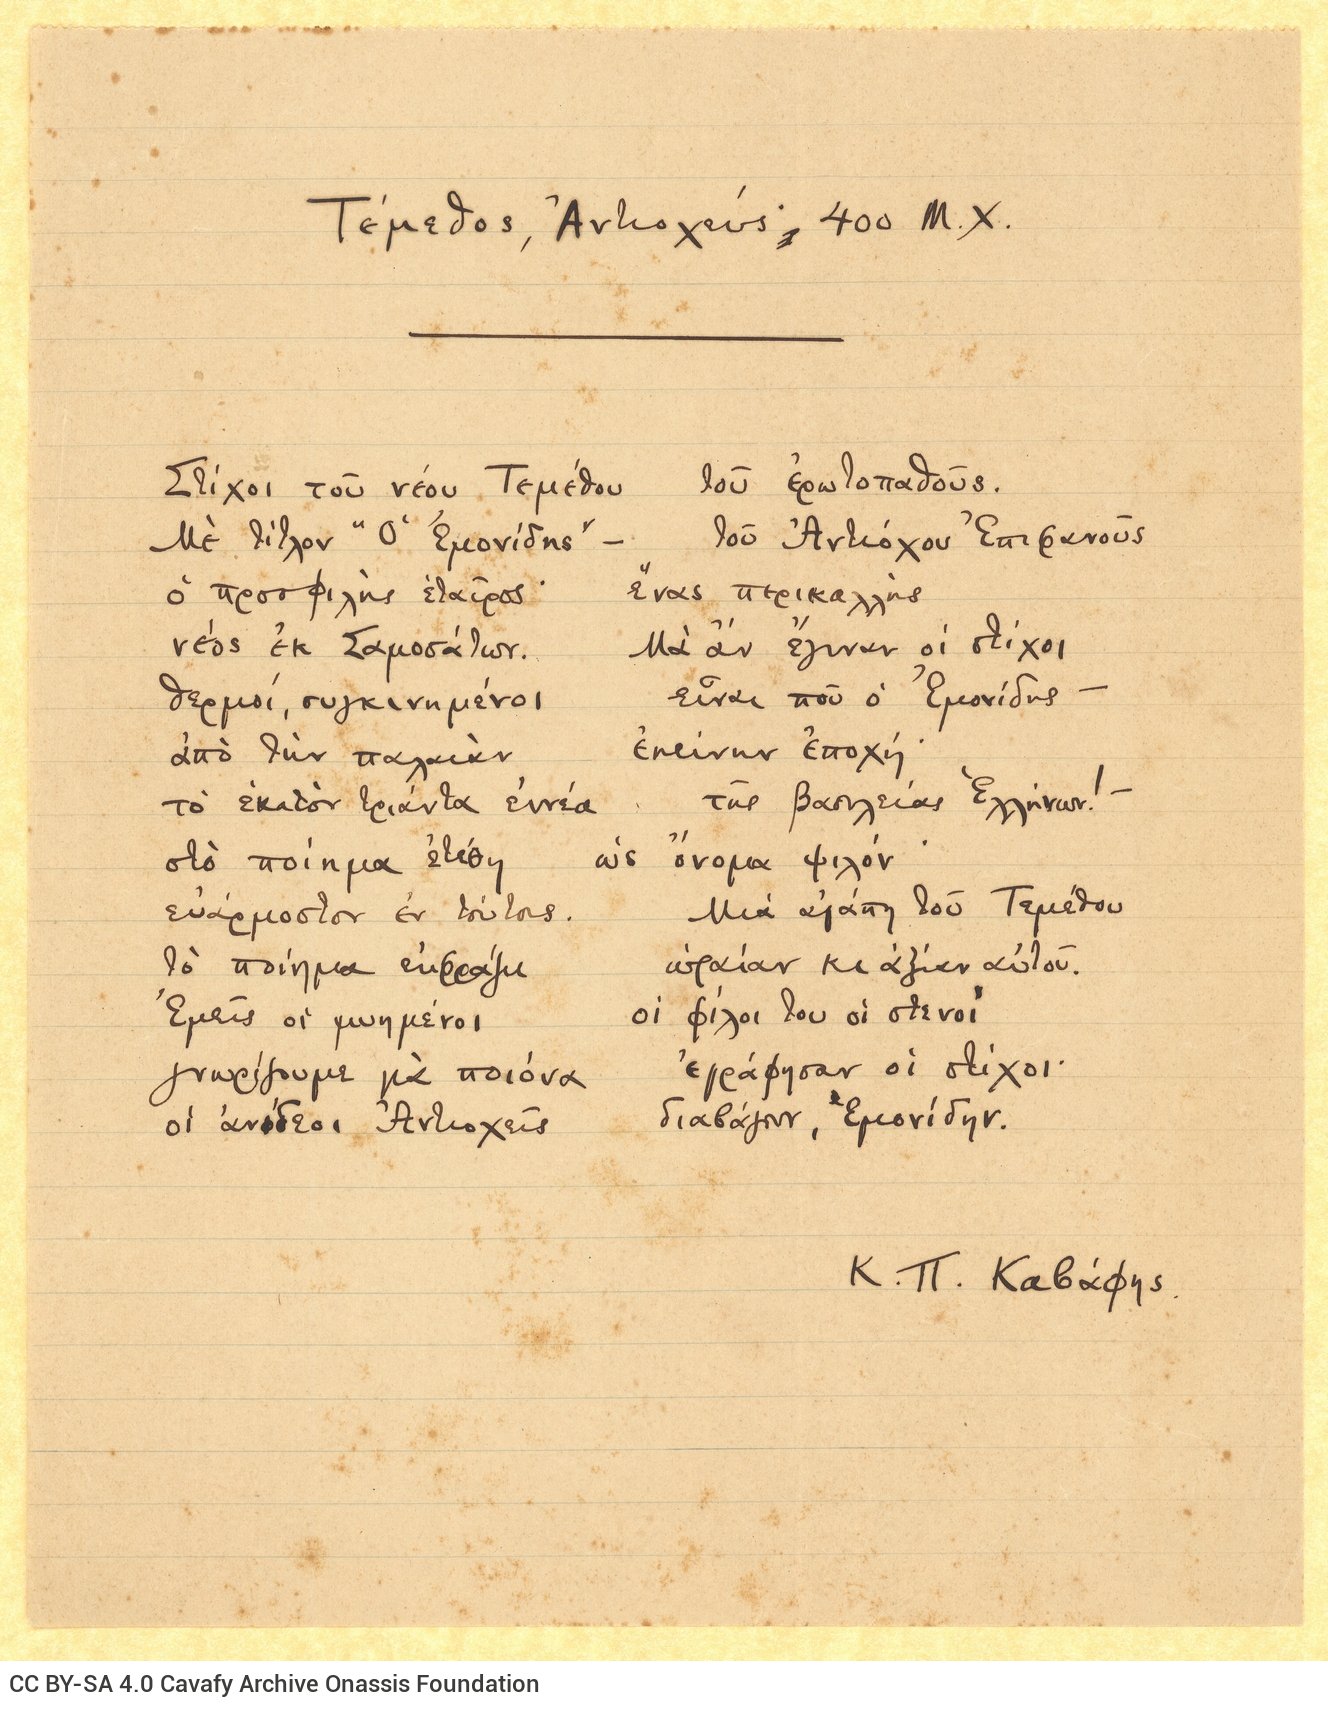 Manuscript of the poem "Temethus, an Antiochene: 400 A.D." on one side of a ruled sheet, signed by the poet. Blank verso.